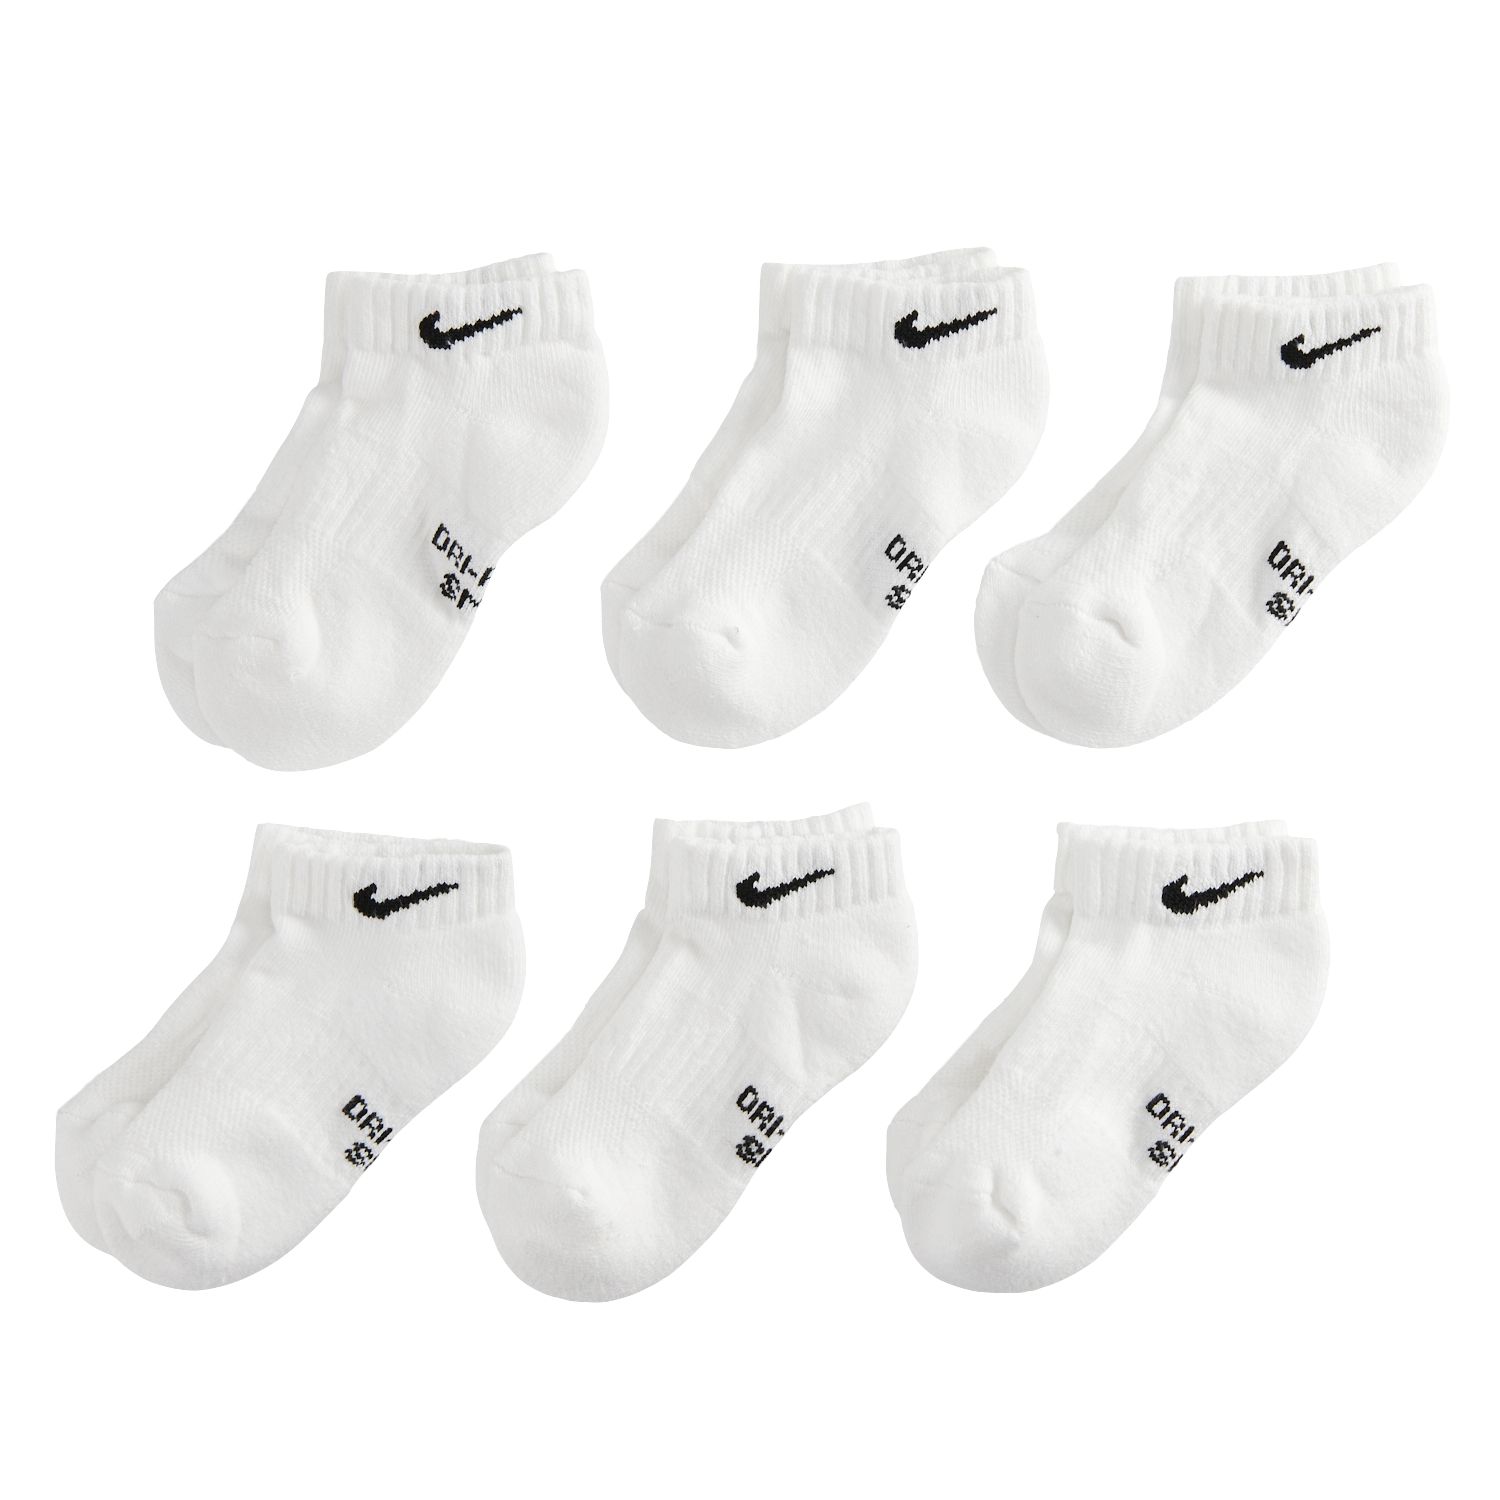 what size are small nike socks